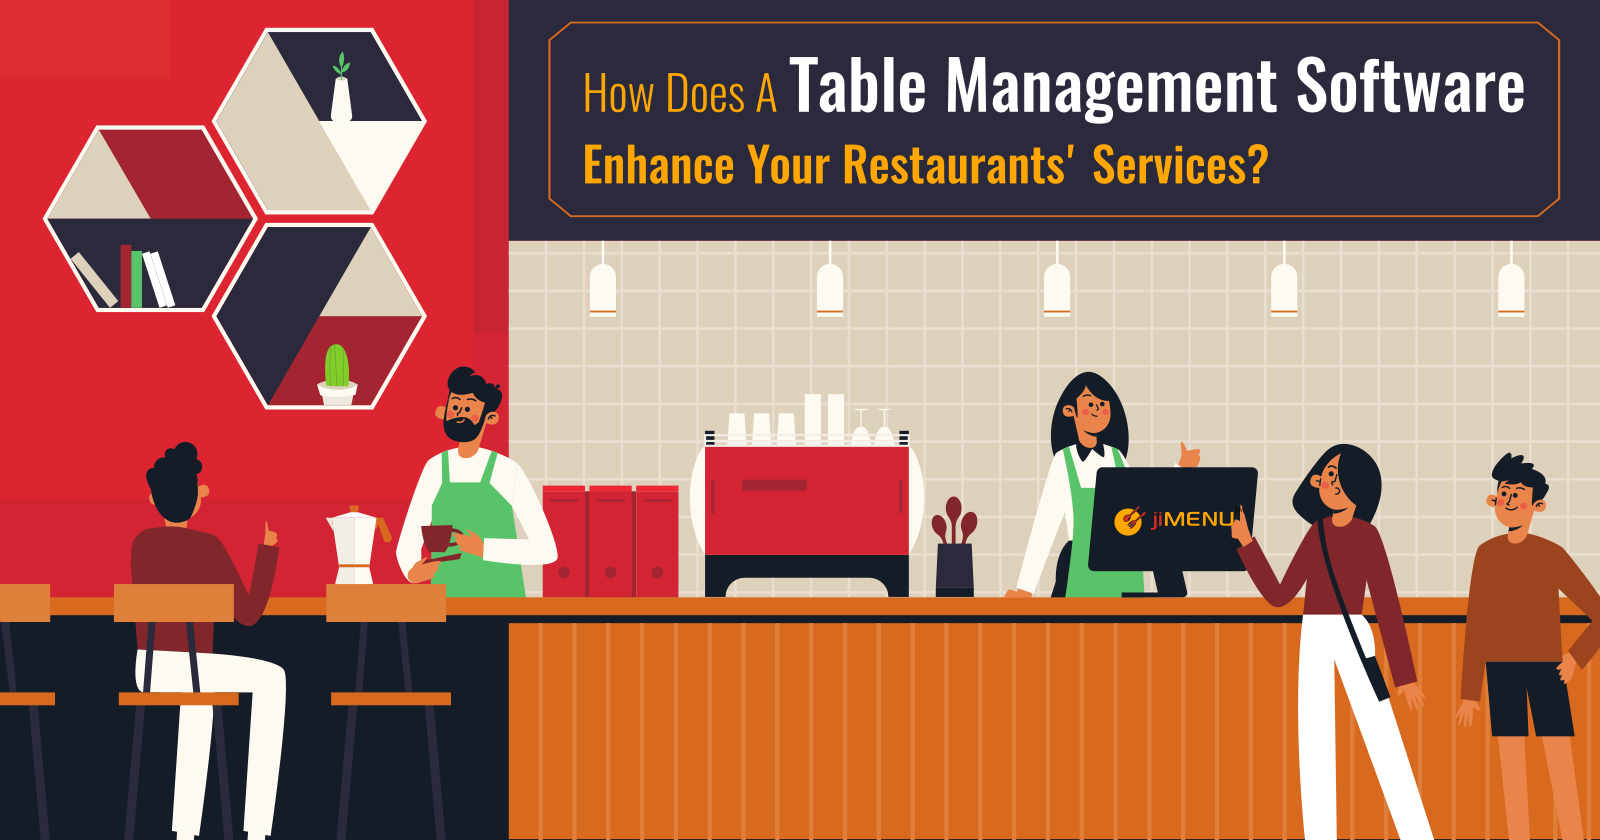 How Does A Table Management Software Enhance Your Restaurants' Services?